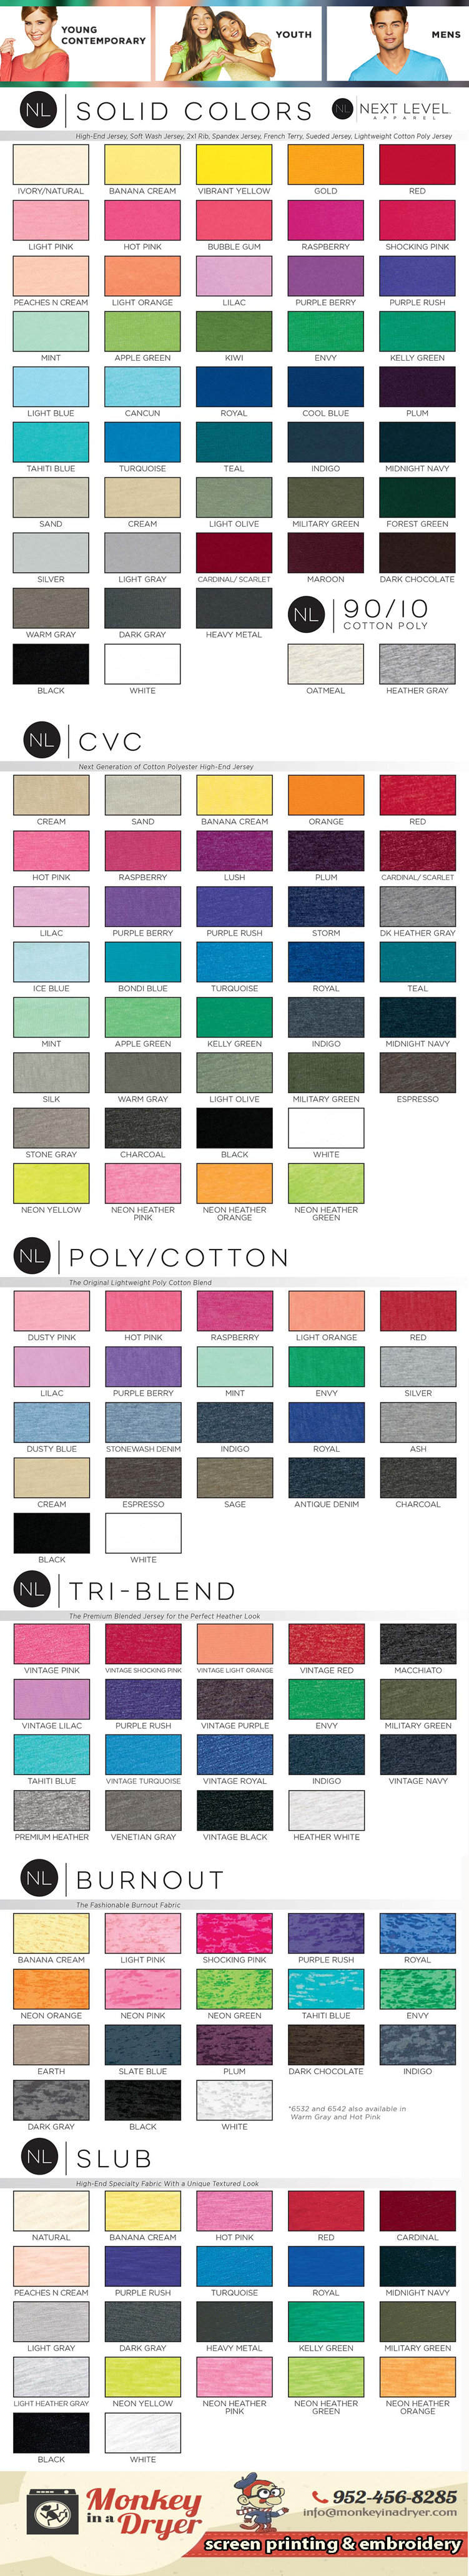 Next Level Apparel Swatch Color Chart | Monkey In A Dryer Screen Printing